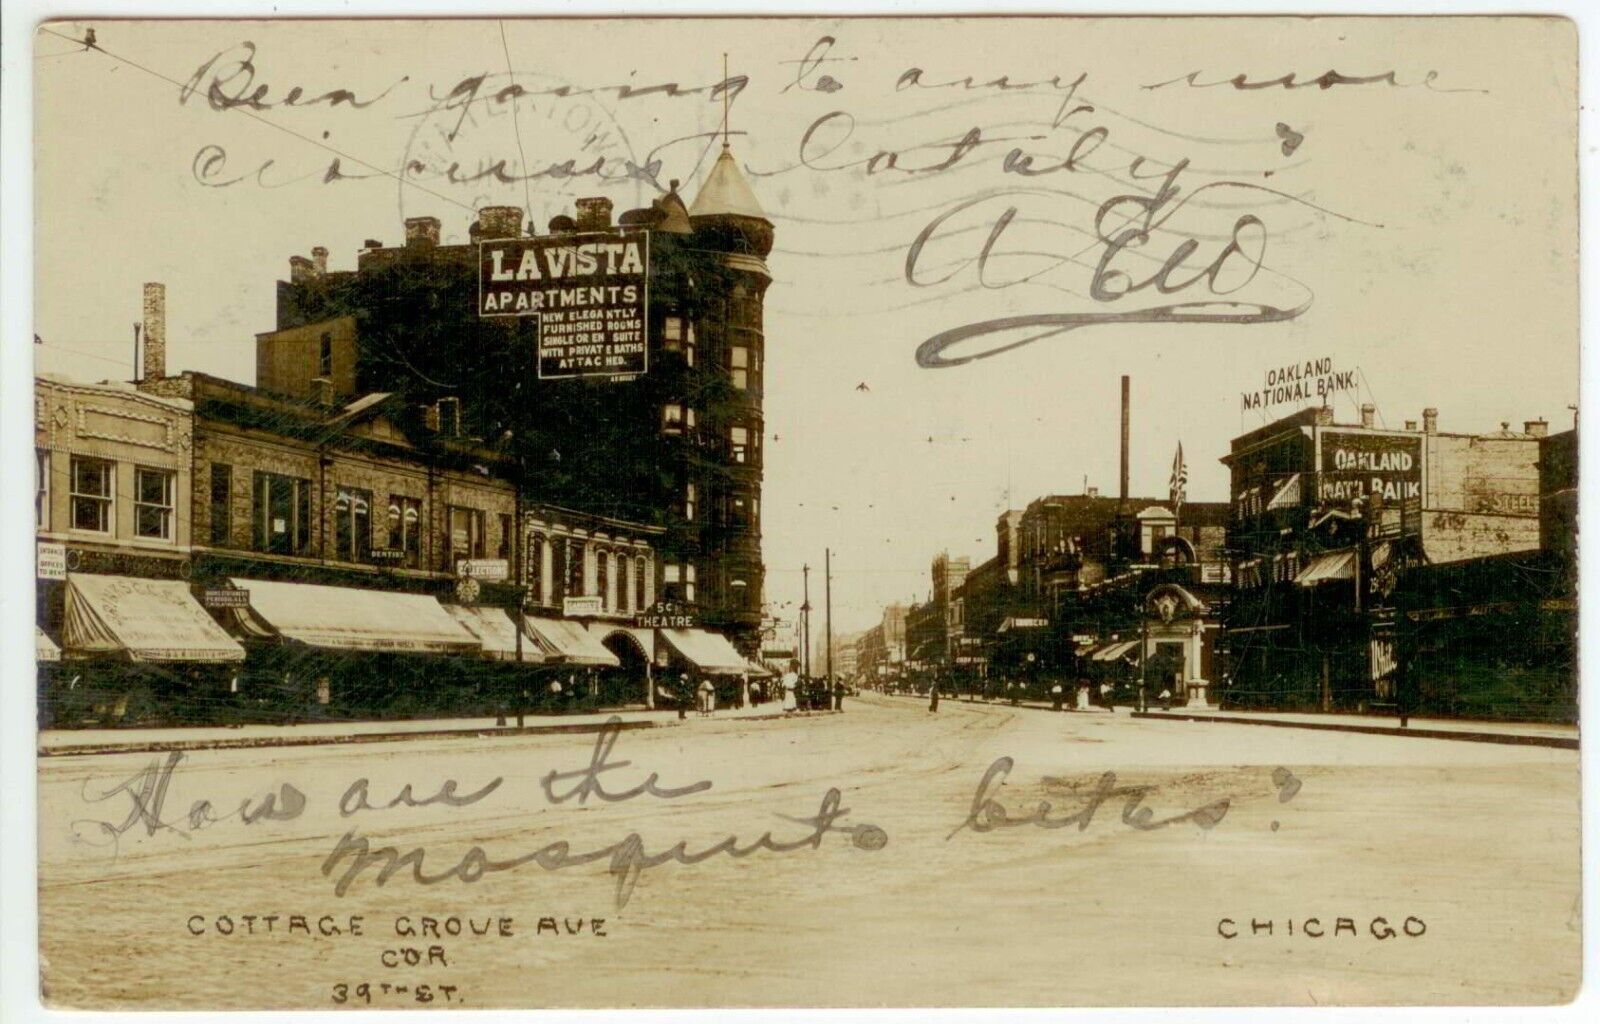 terrific 1908 Chicago Illinois Cottage Grove Avenue and 39th Street Real Photo